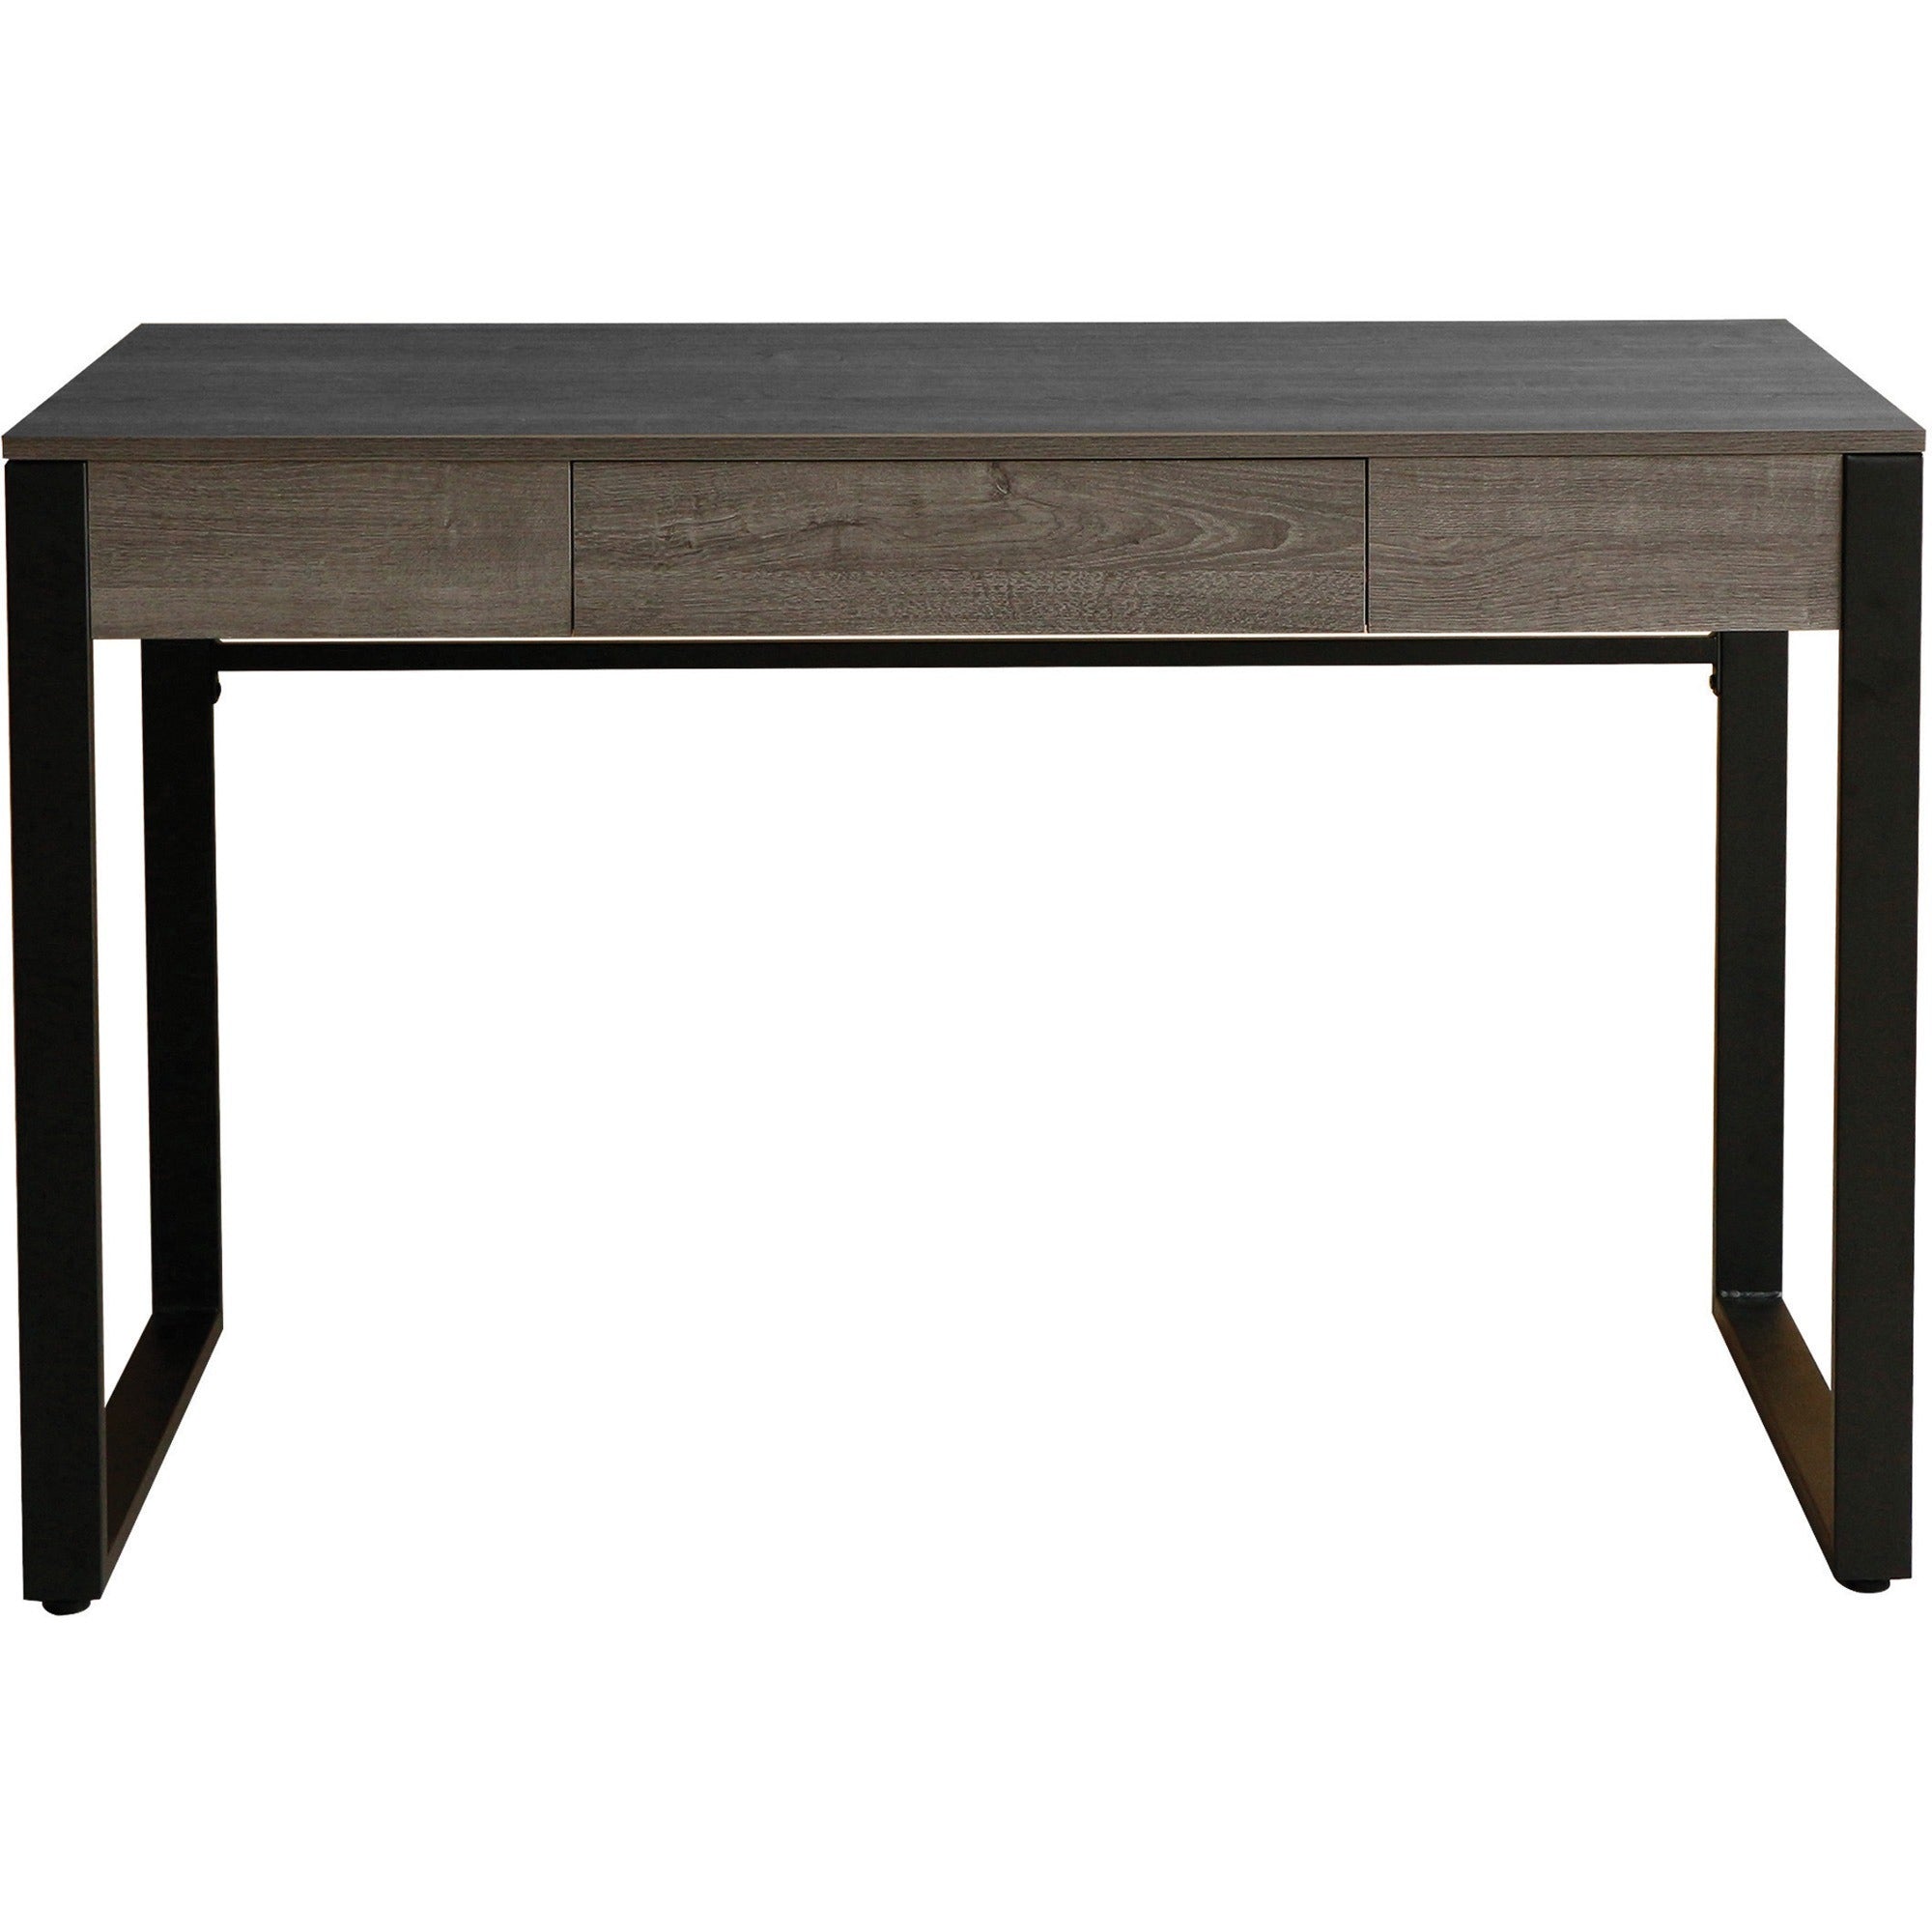 lorell-soho-desk-with-center-drawer-47-x-23530-1-drawers-band-edge-finish-charcoal_llr97618 - 2